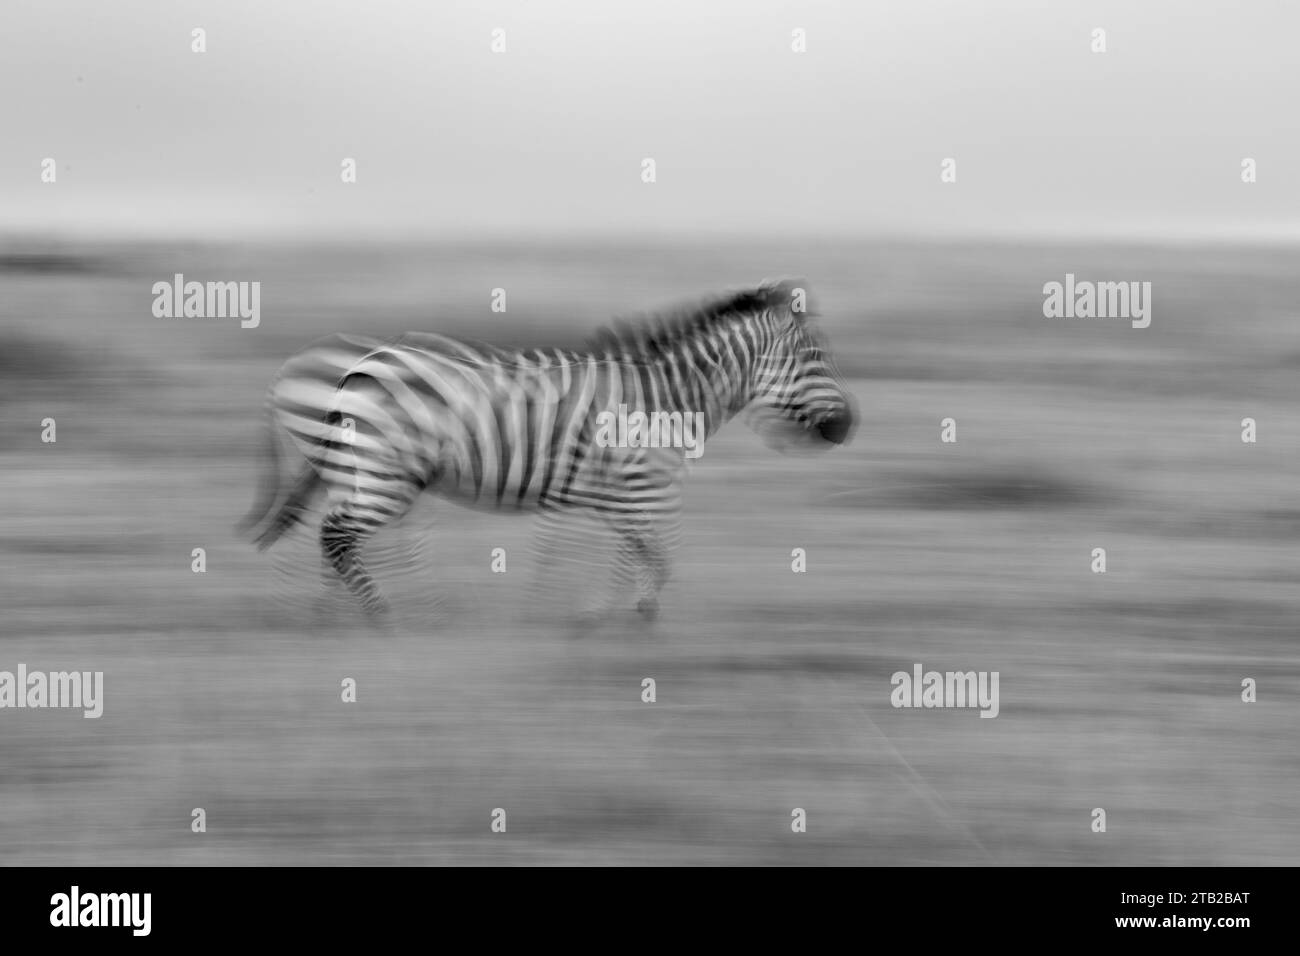 A creative motion blur zebra running. This is a creative shot while purposefully motion blurred. This is a black and white photo. Stock Photo